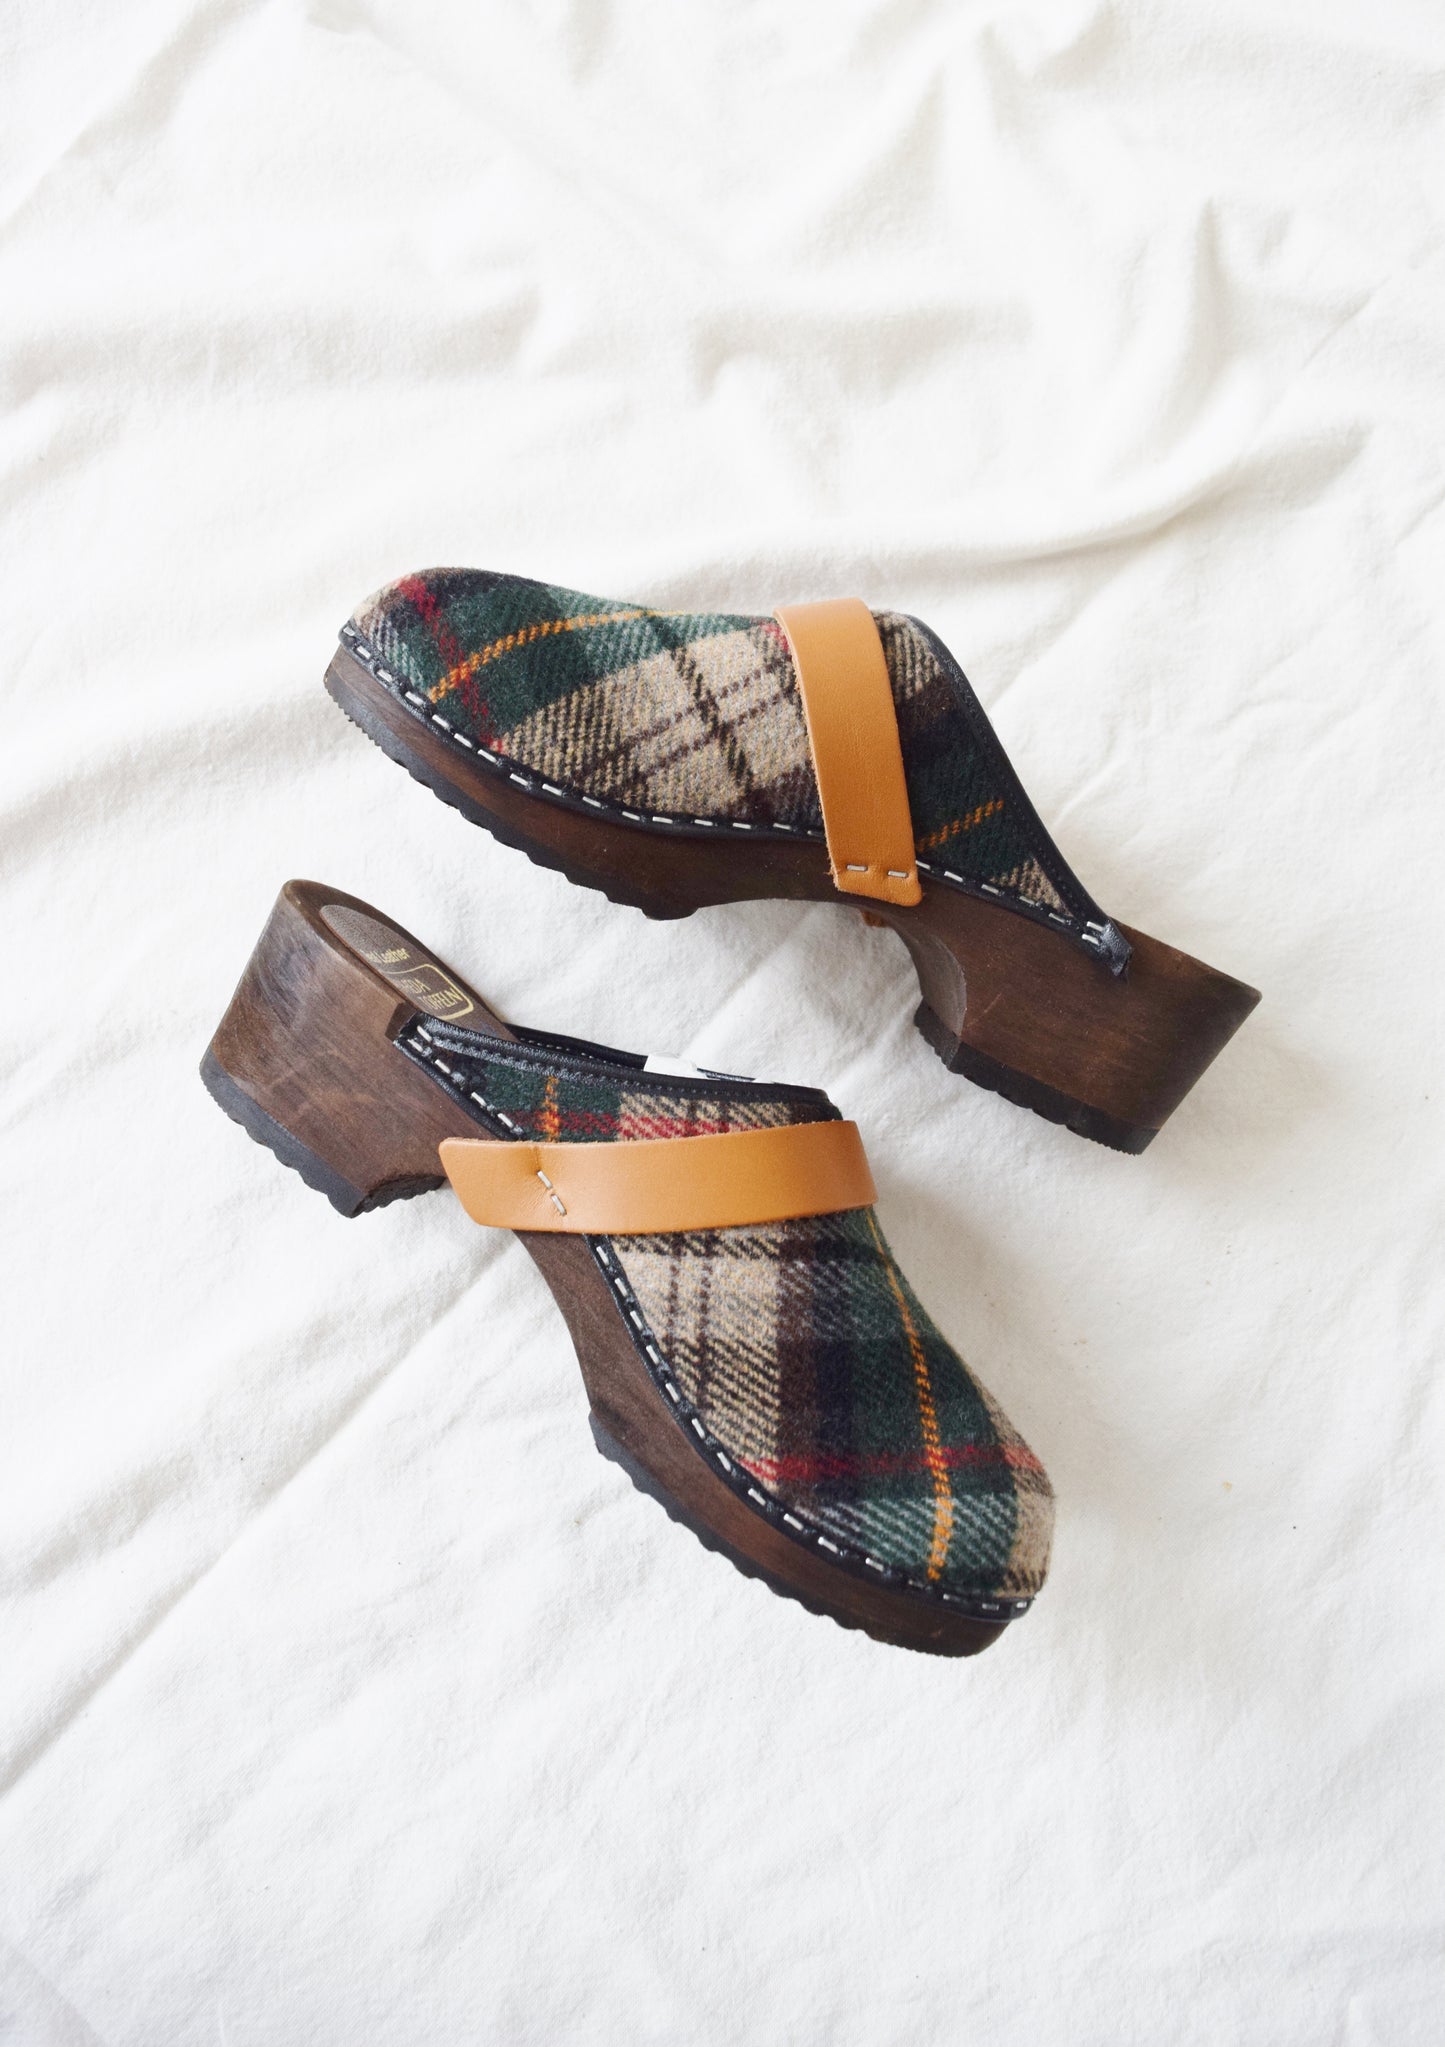 Classic Swedish Clogs in Fall Plaid by Moheda Toffeln | US 6.5 (EU 37, UK 4.5)